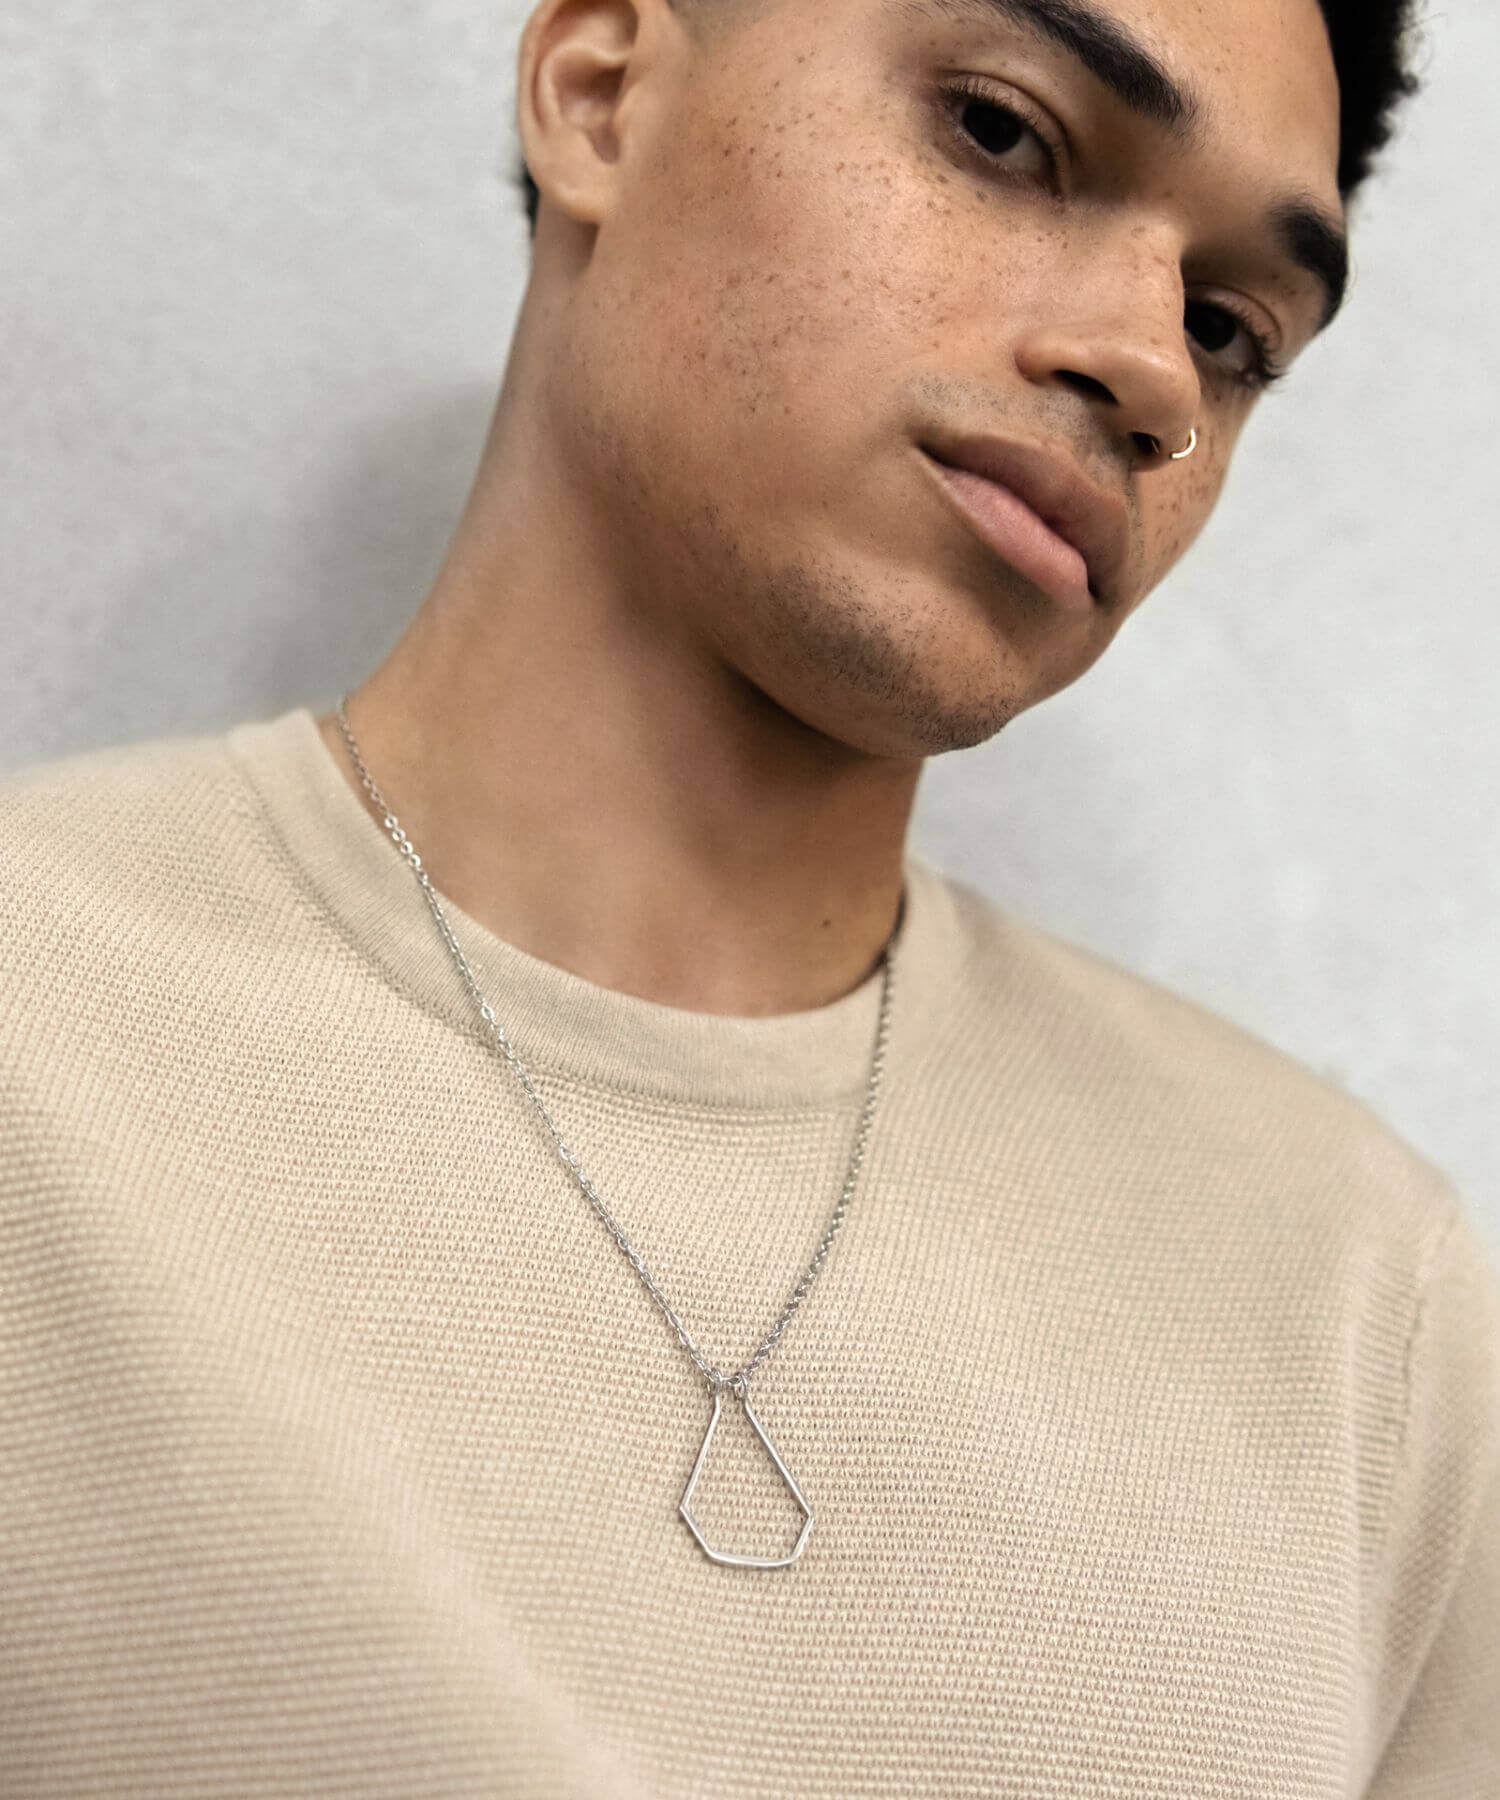 Personalised Men's Triangle Pendant Necklace | Lisa Angel